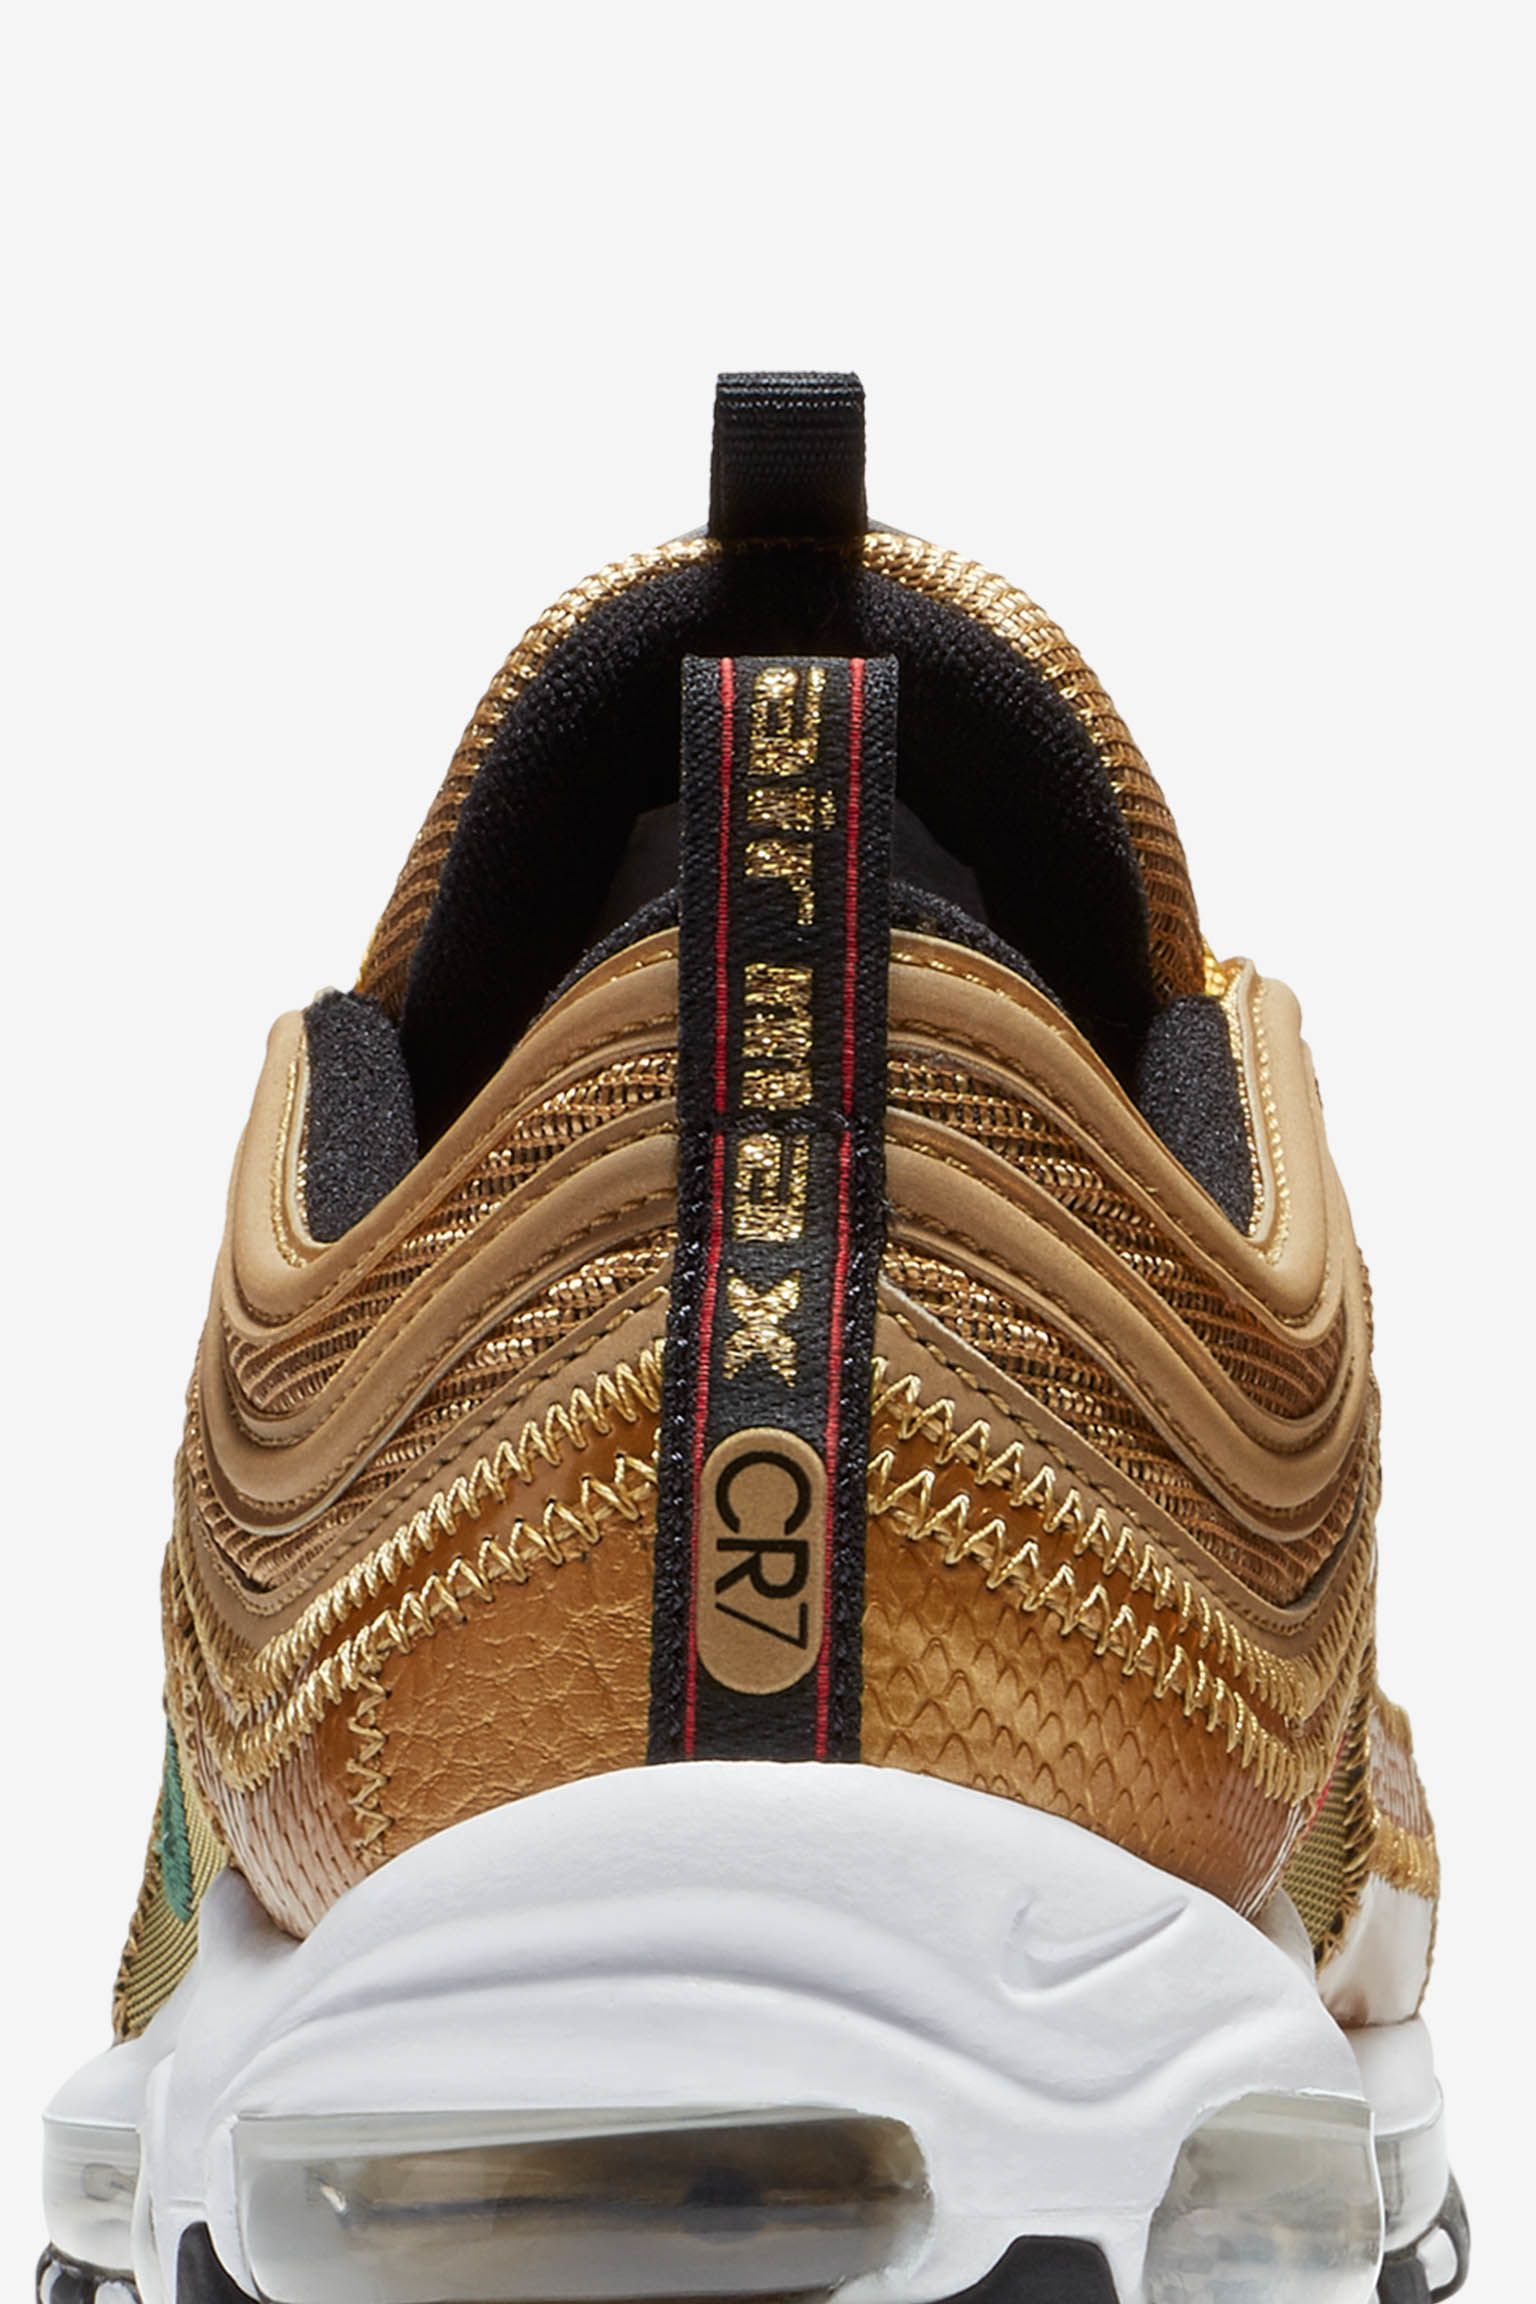 Sorprendido Equipo pozo Nike Air Max 97 CR7 'Golden Patchwork' Release Date. Nike SNKRS GB